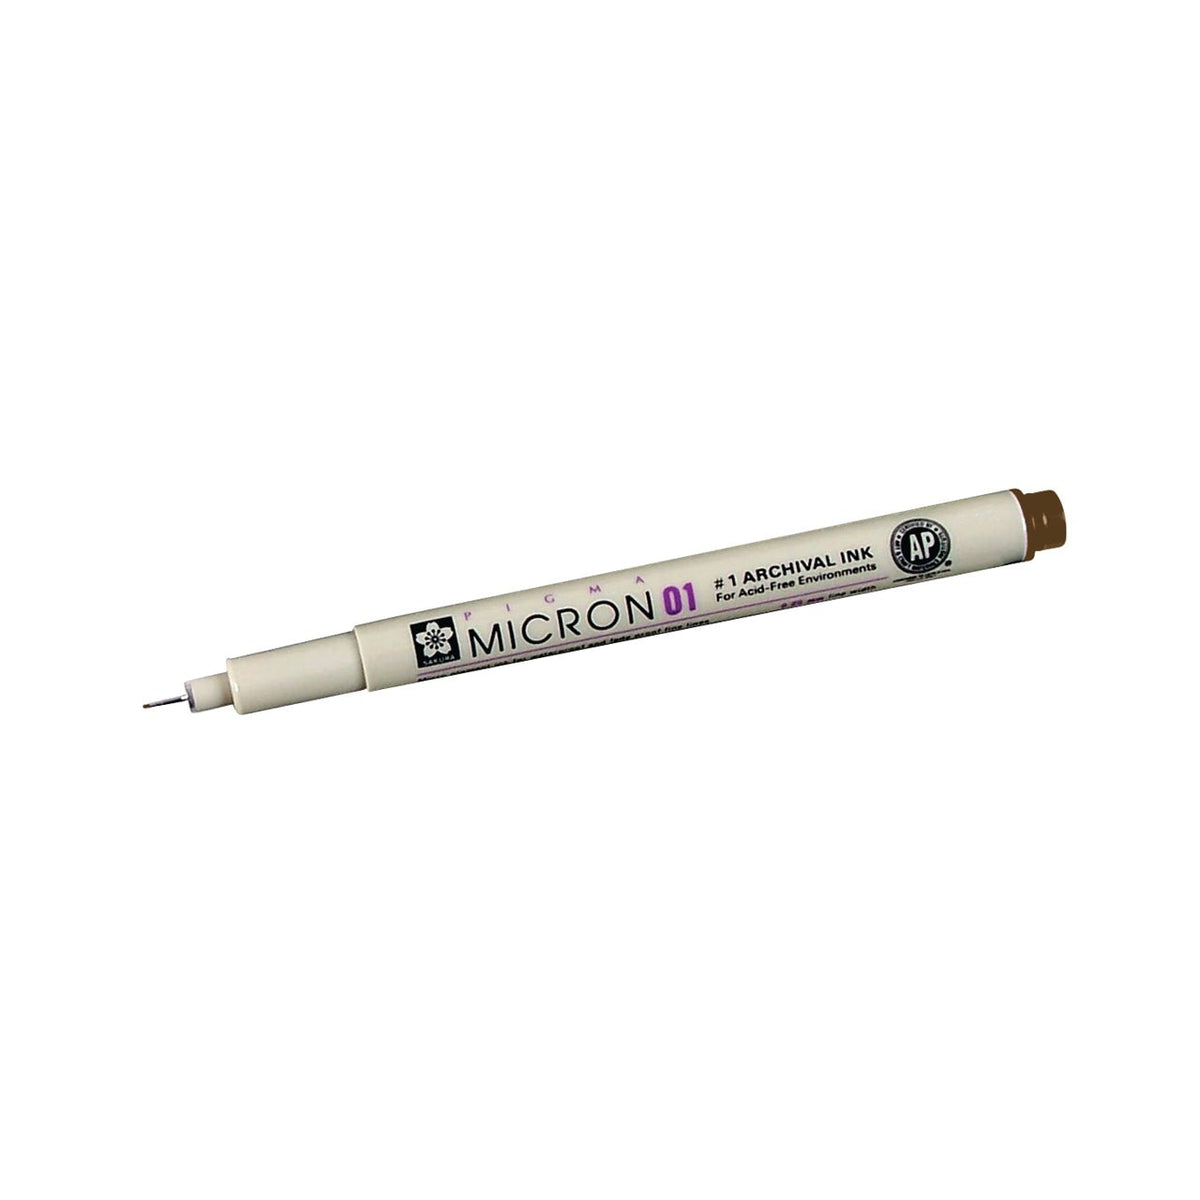 Scratch-Art Large Stylus Stick, 5-1/4 x 1/4 Inches, Pack of 25